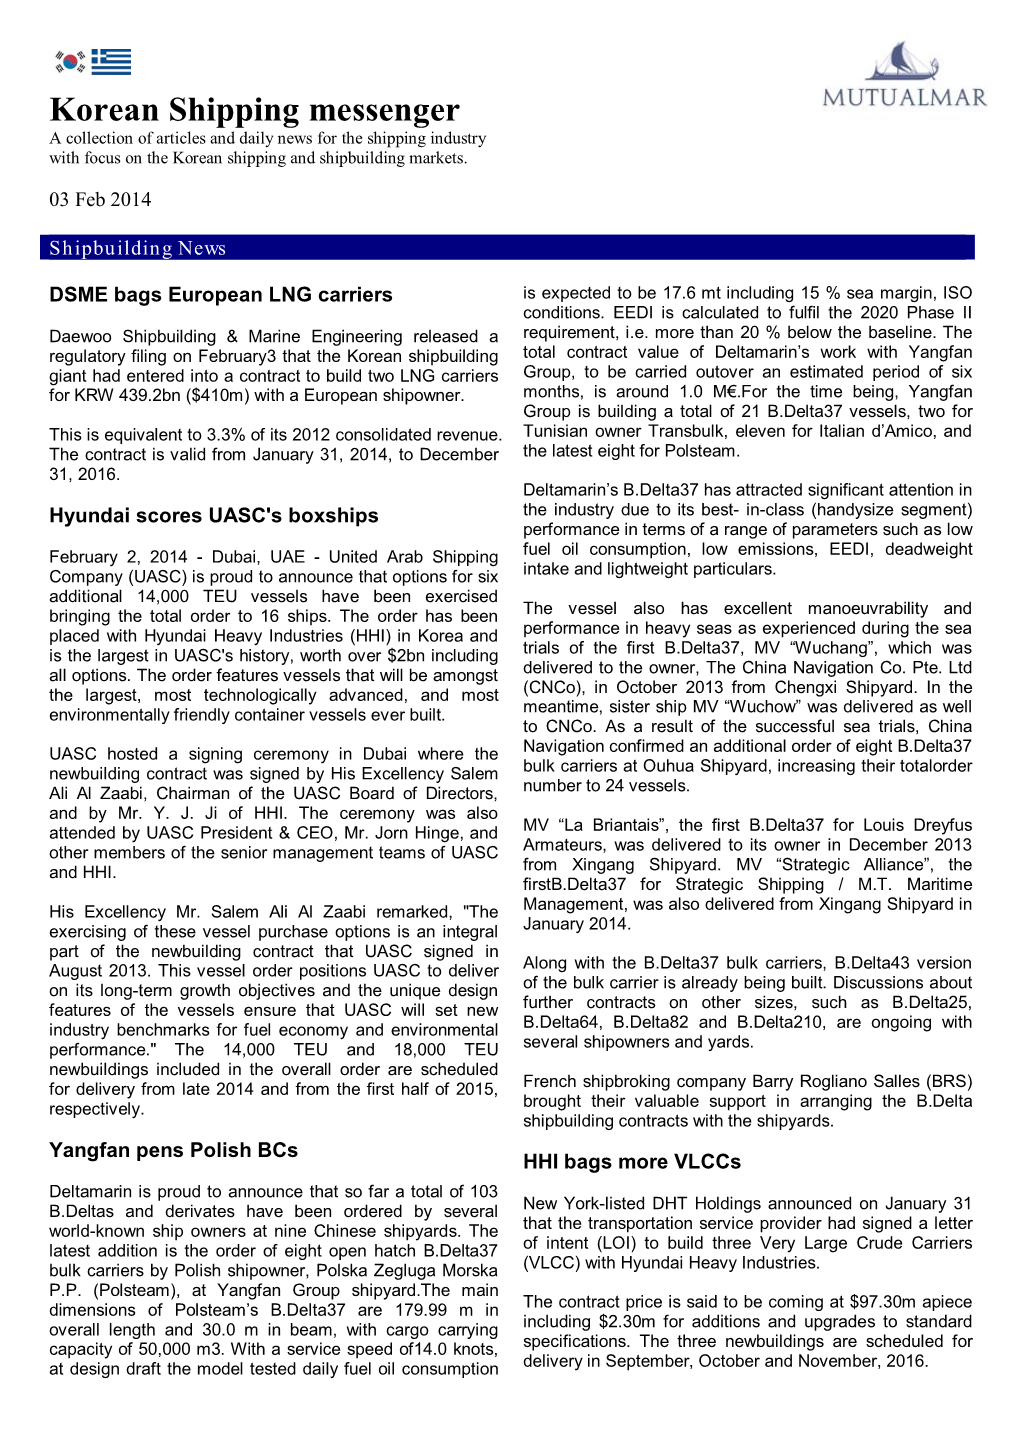 Korean Shipping Messenger a Collection of Articles and Daily News for the Shipping Industry with Focus on the Korean Shipping and Shipbuilding Markets